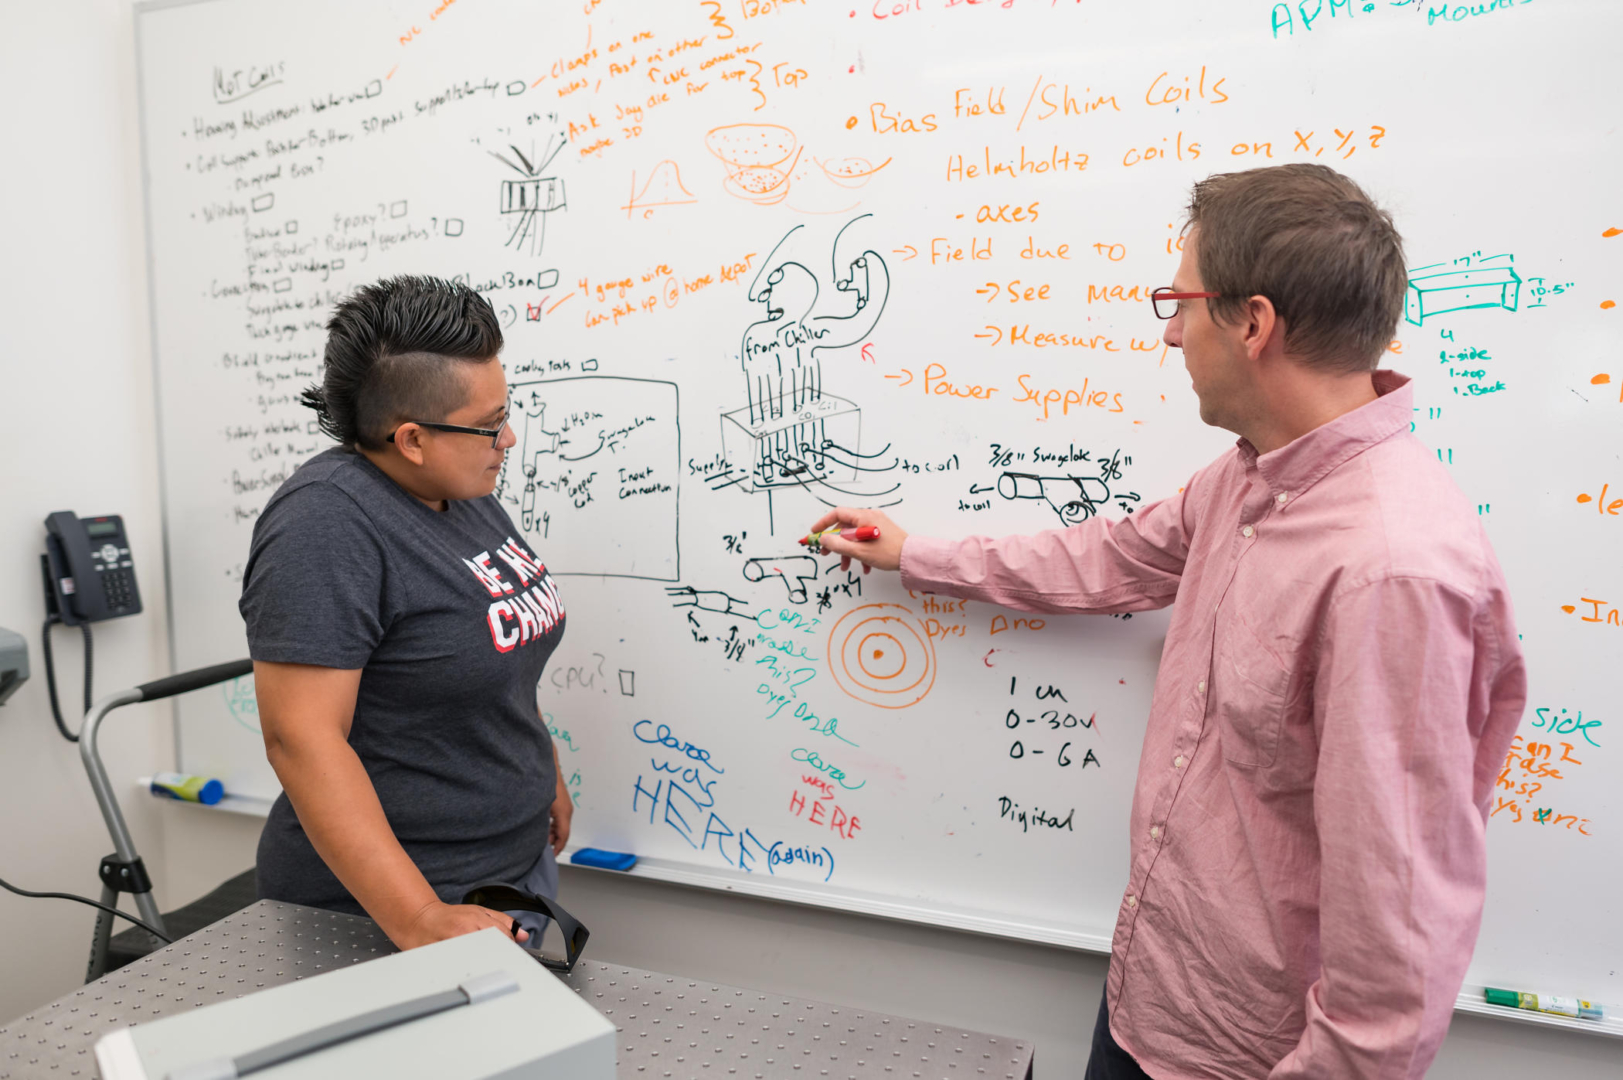 Yolanda Reyes and Joe Pechkis make notes on a whiteboard covered in sketches, equations, and phrases.